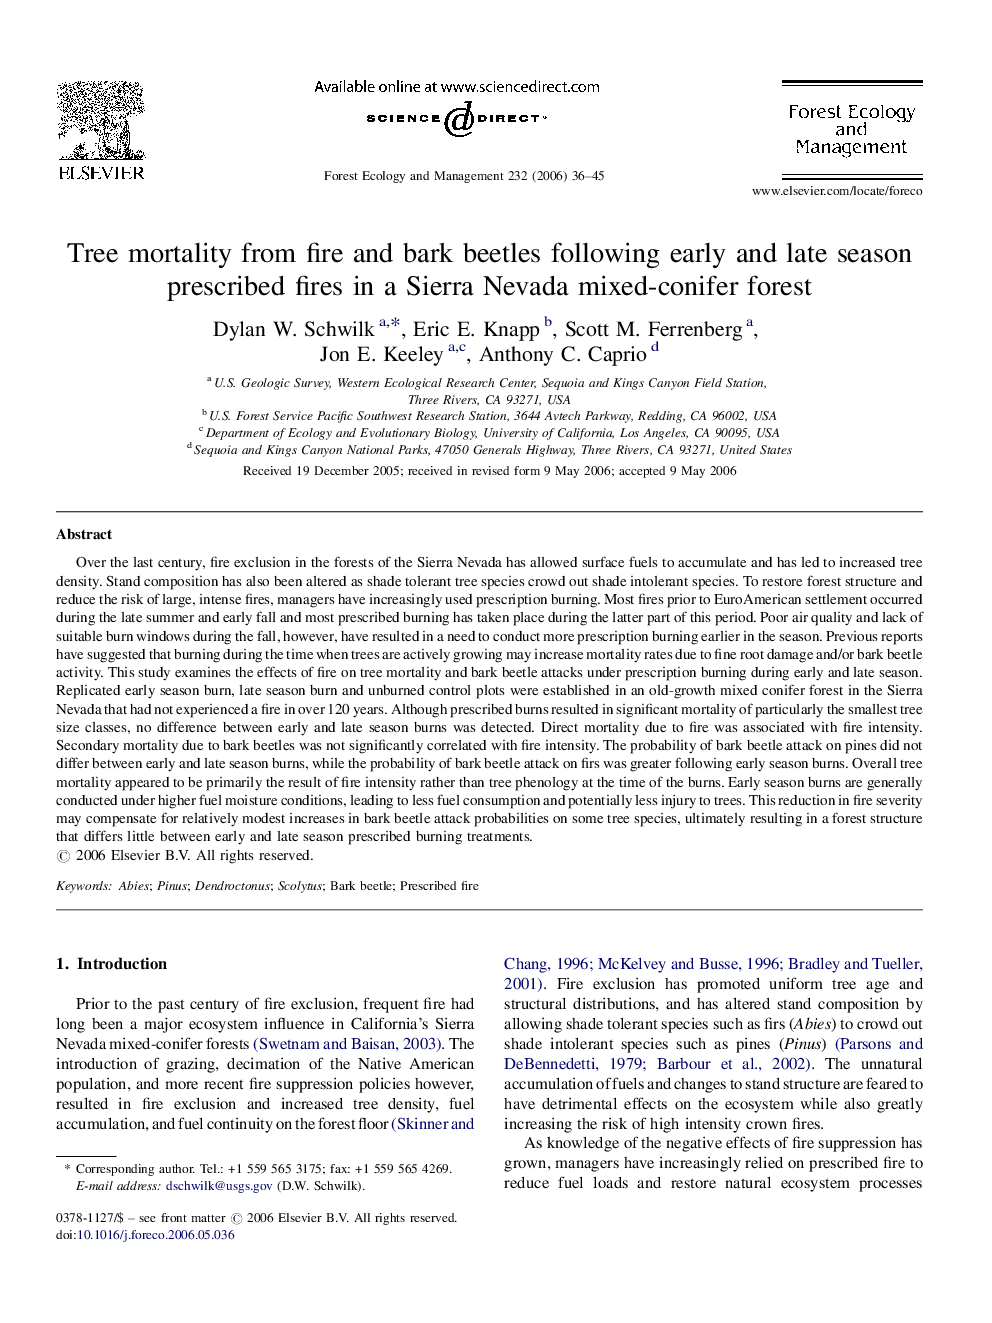 Tree mortality from fire and bark beetles following early and late season prescribed fires in a Sierra Nevada mixed-conifer forest